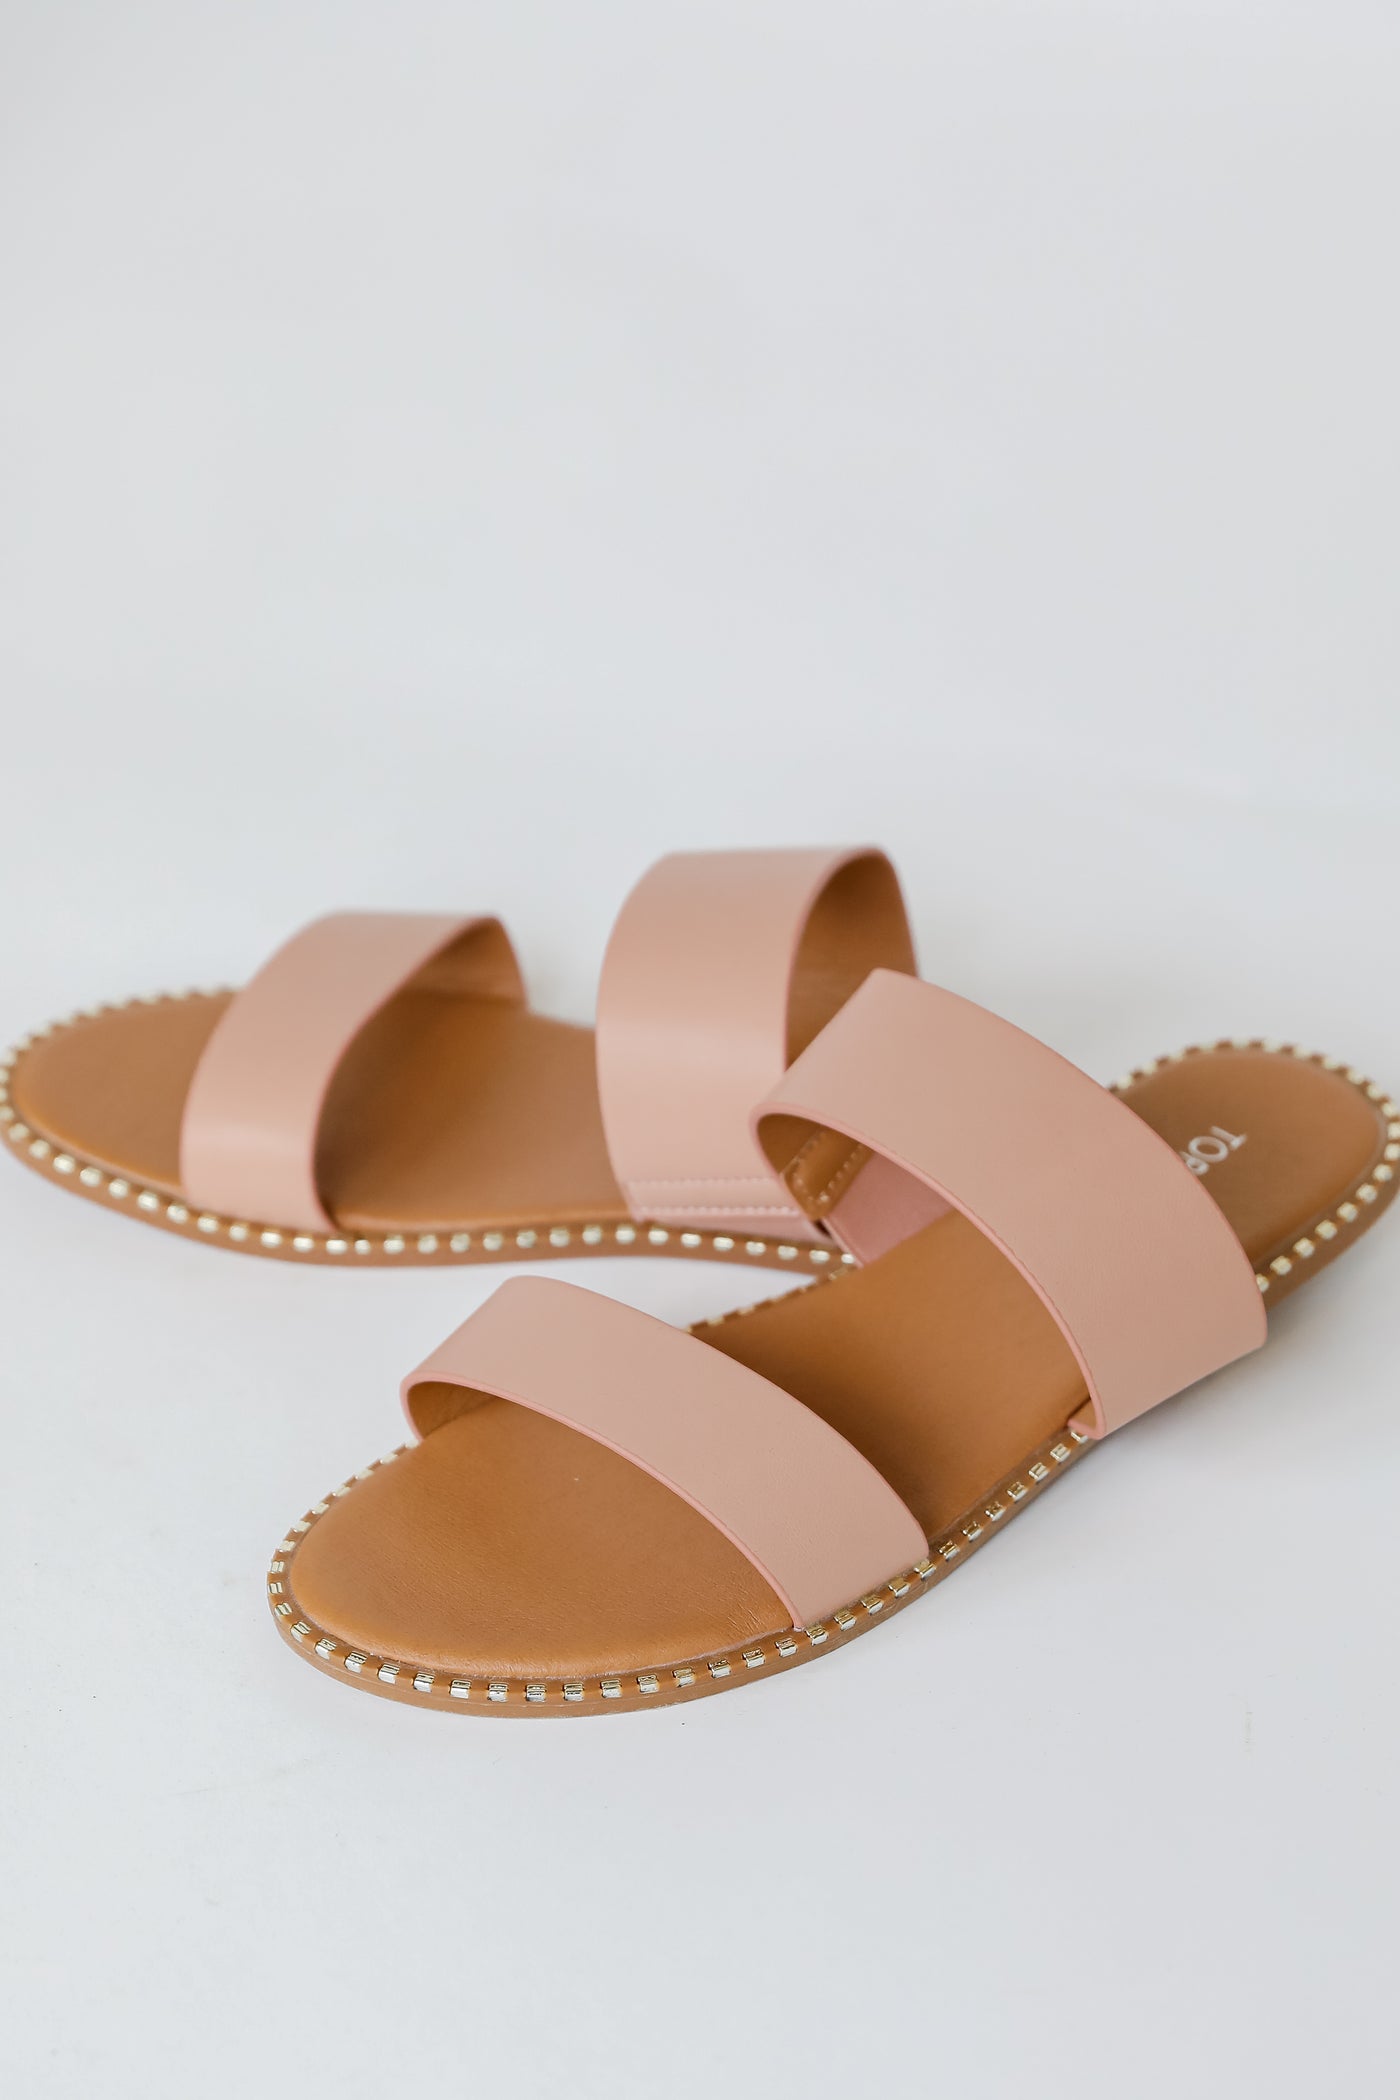 Double Strap Sandals in nude close up